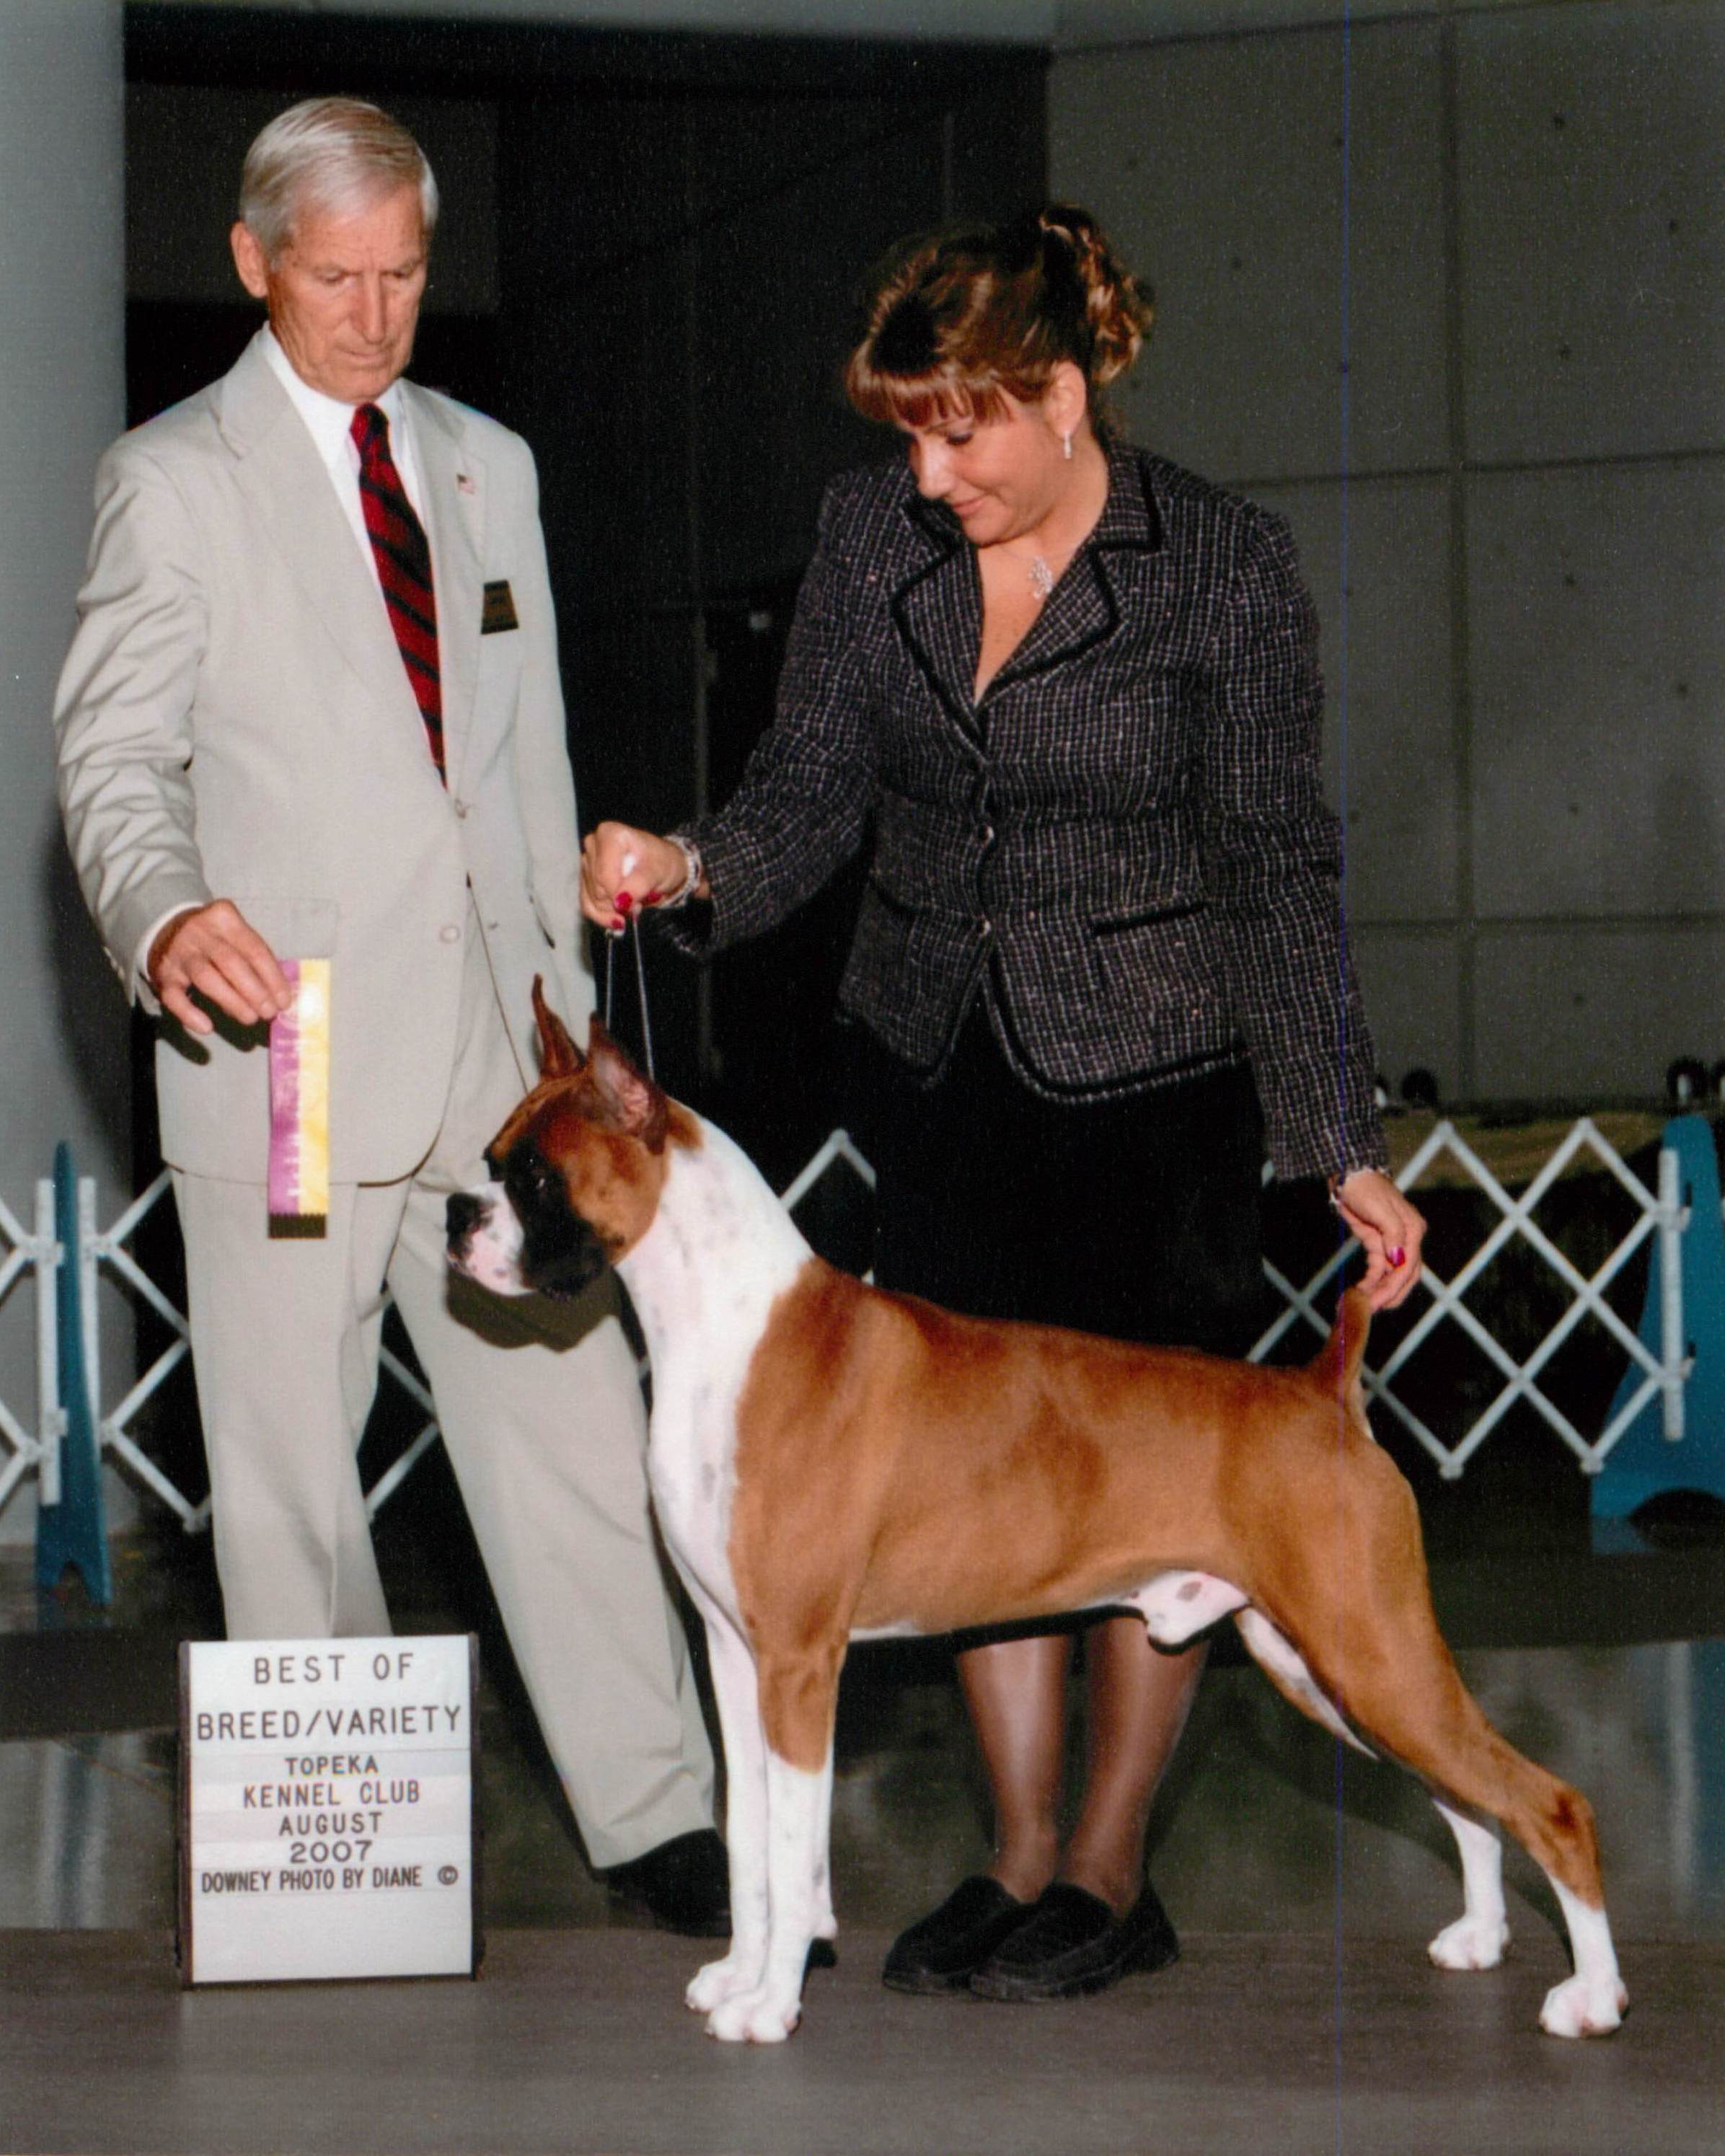 Best of Breed @ 2007 Specialty Show #2